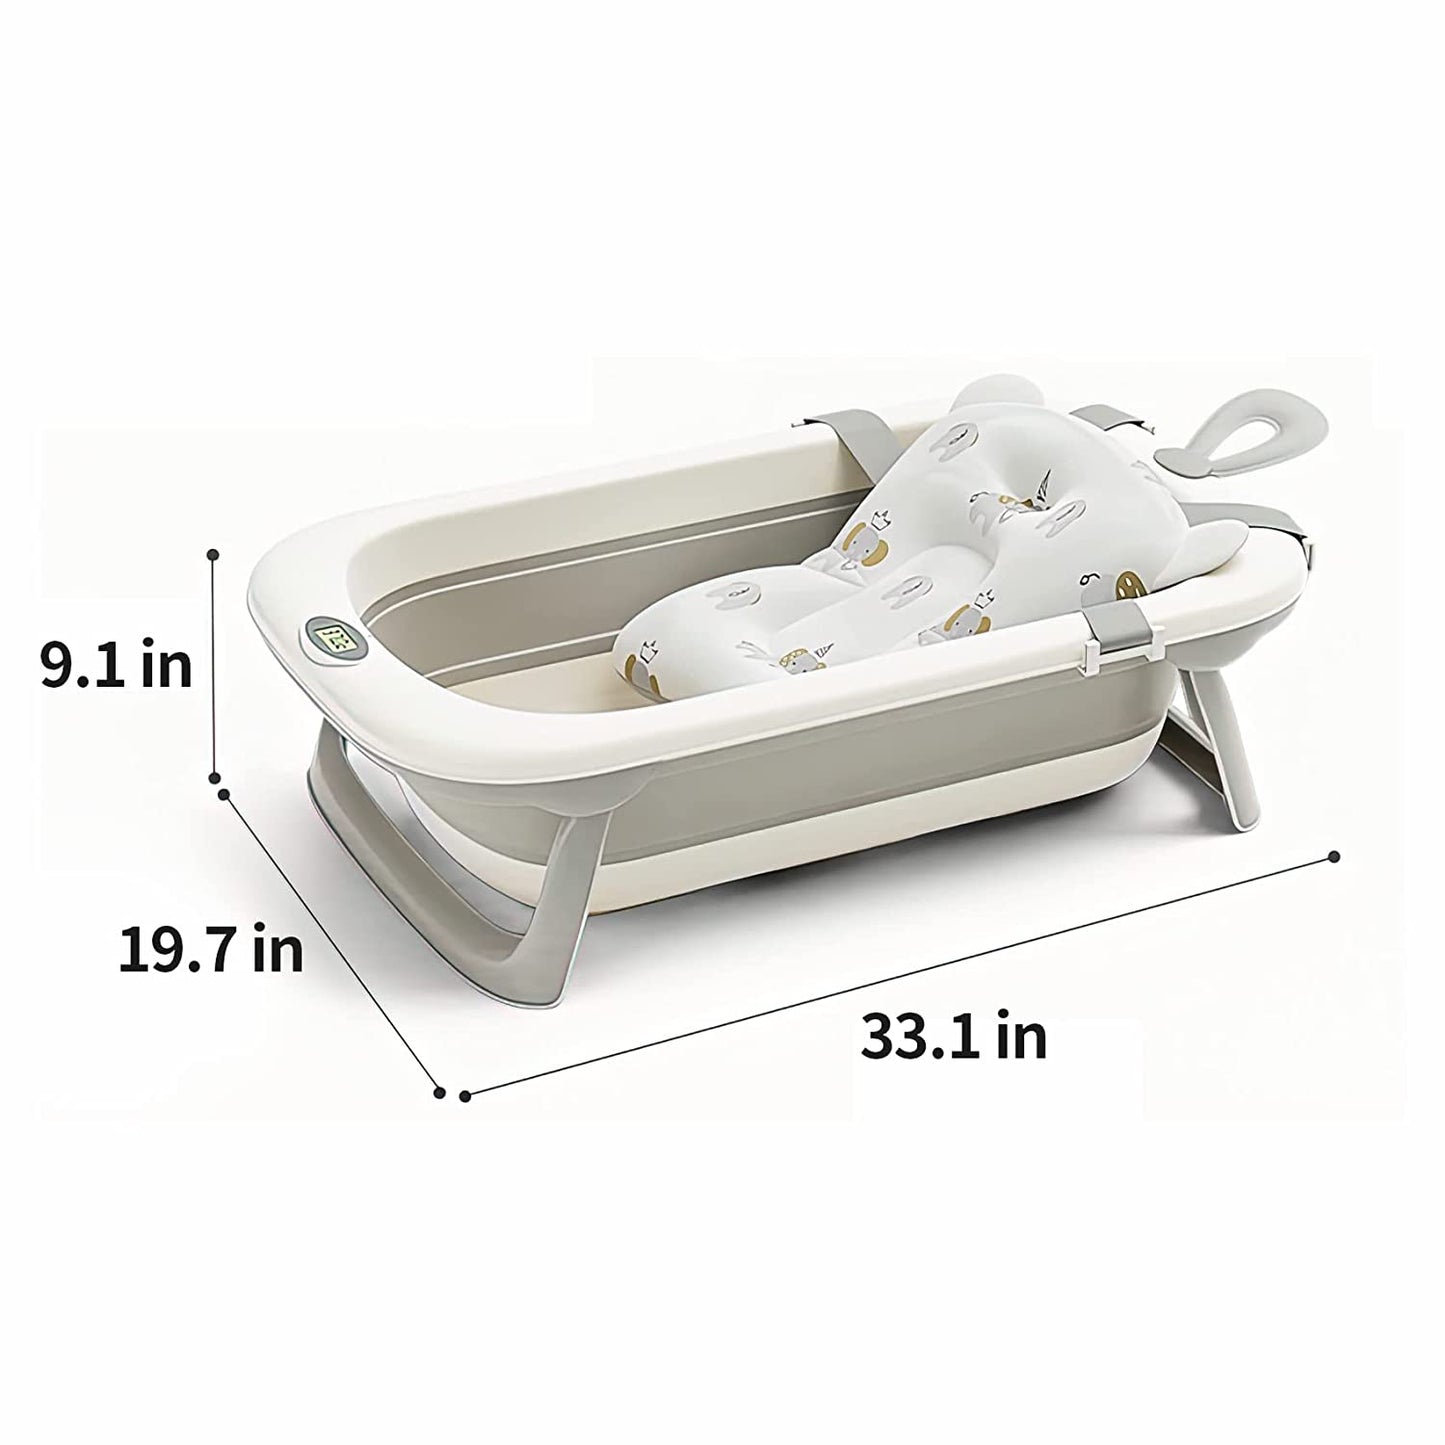 UNICOO - Baby Folding Bathtub for Newborn/Infant/Toddler, Portable Collapsible Tub for Travel and Easy Storage, Multifunctional Baby Foldable Shower Sink, with Support Pad and Thermometer